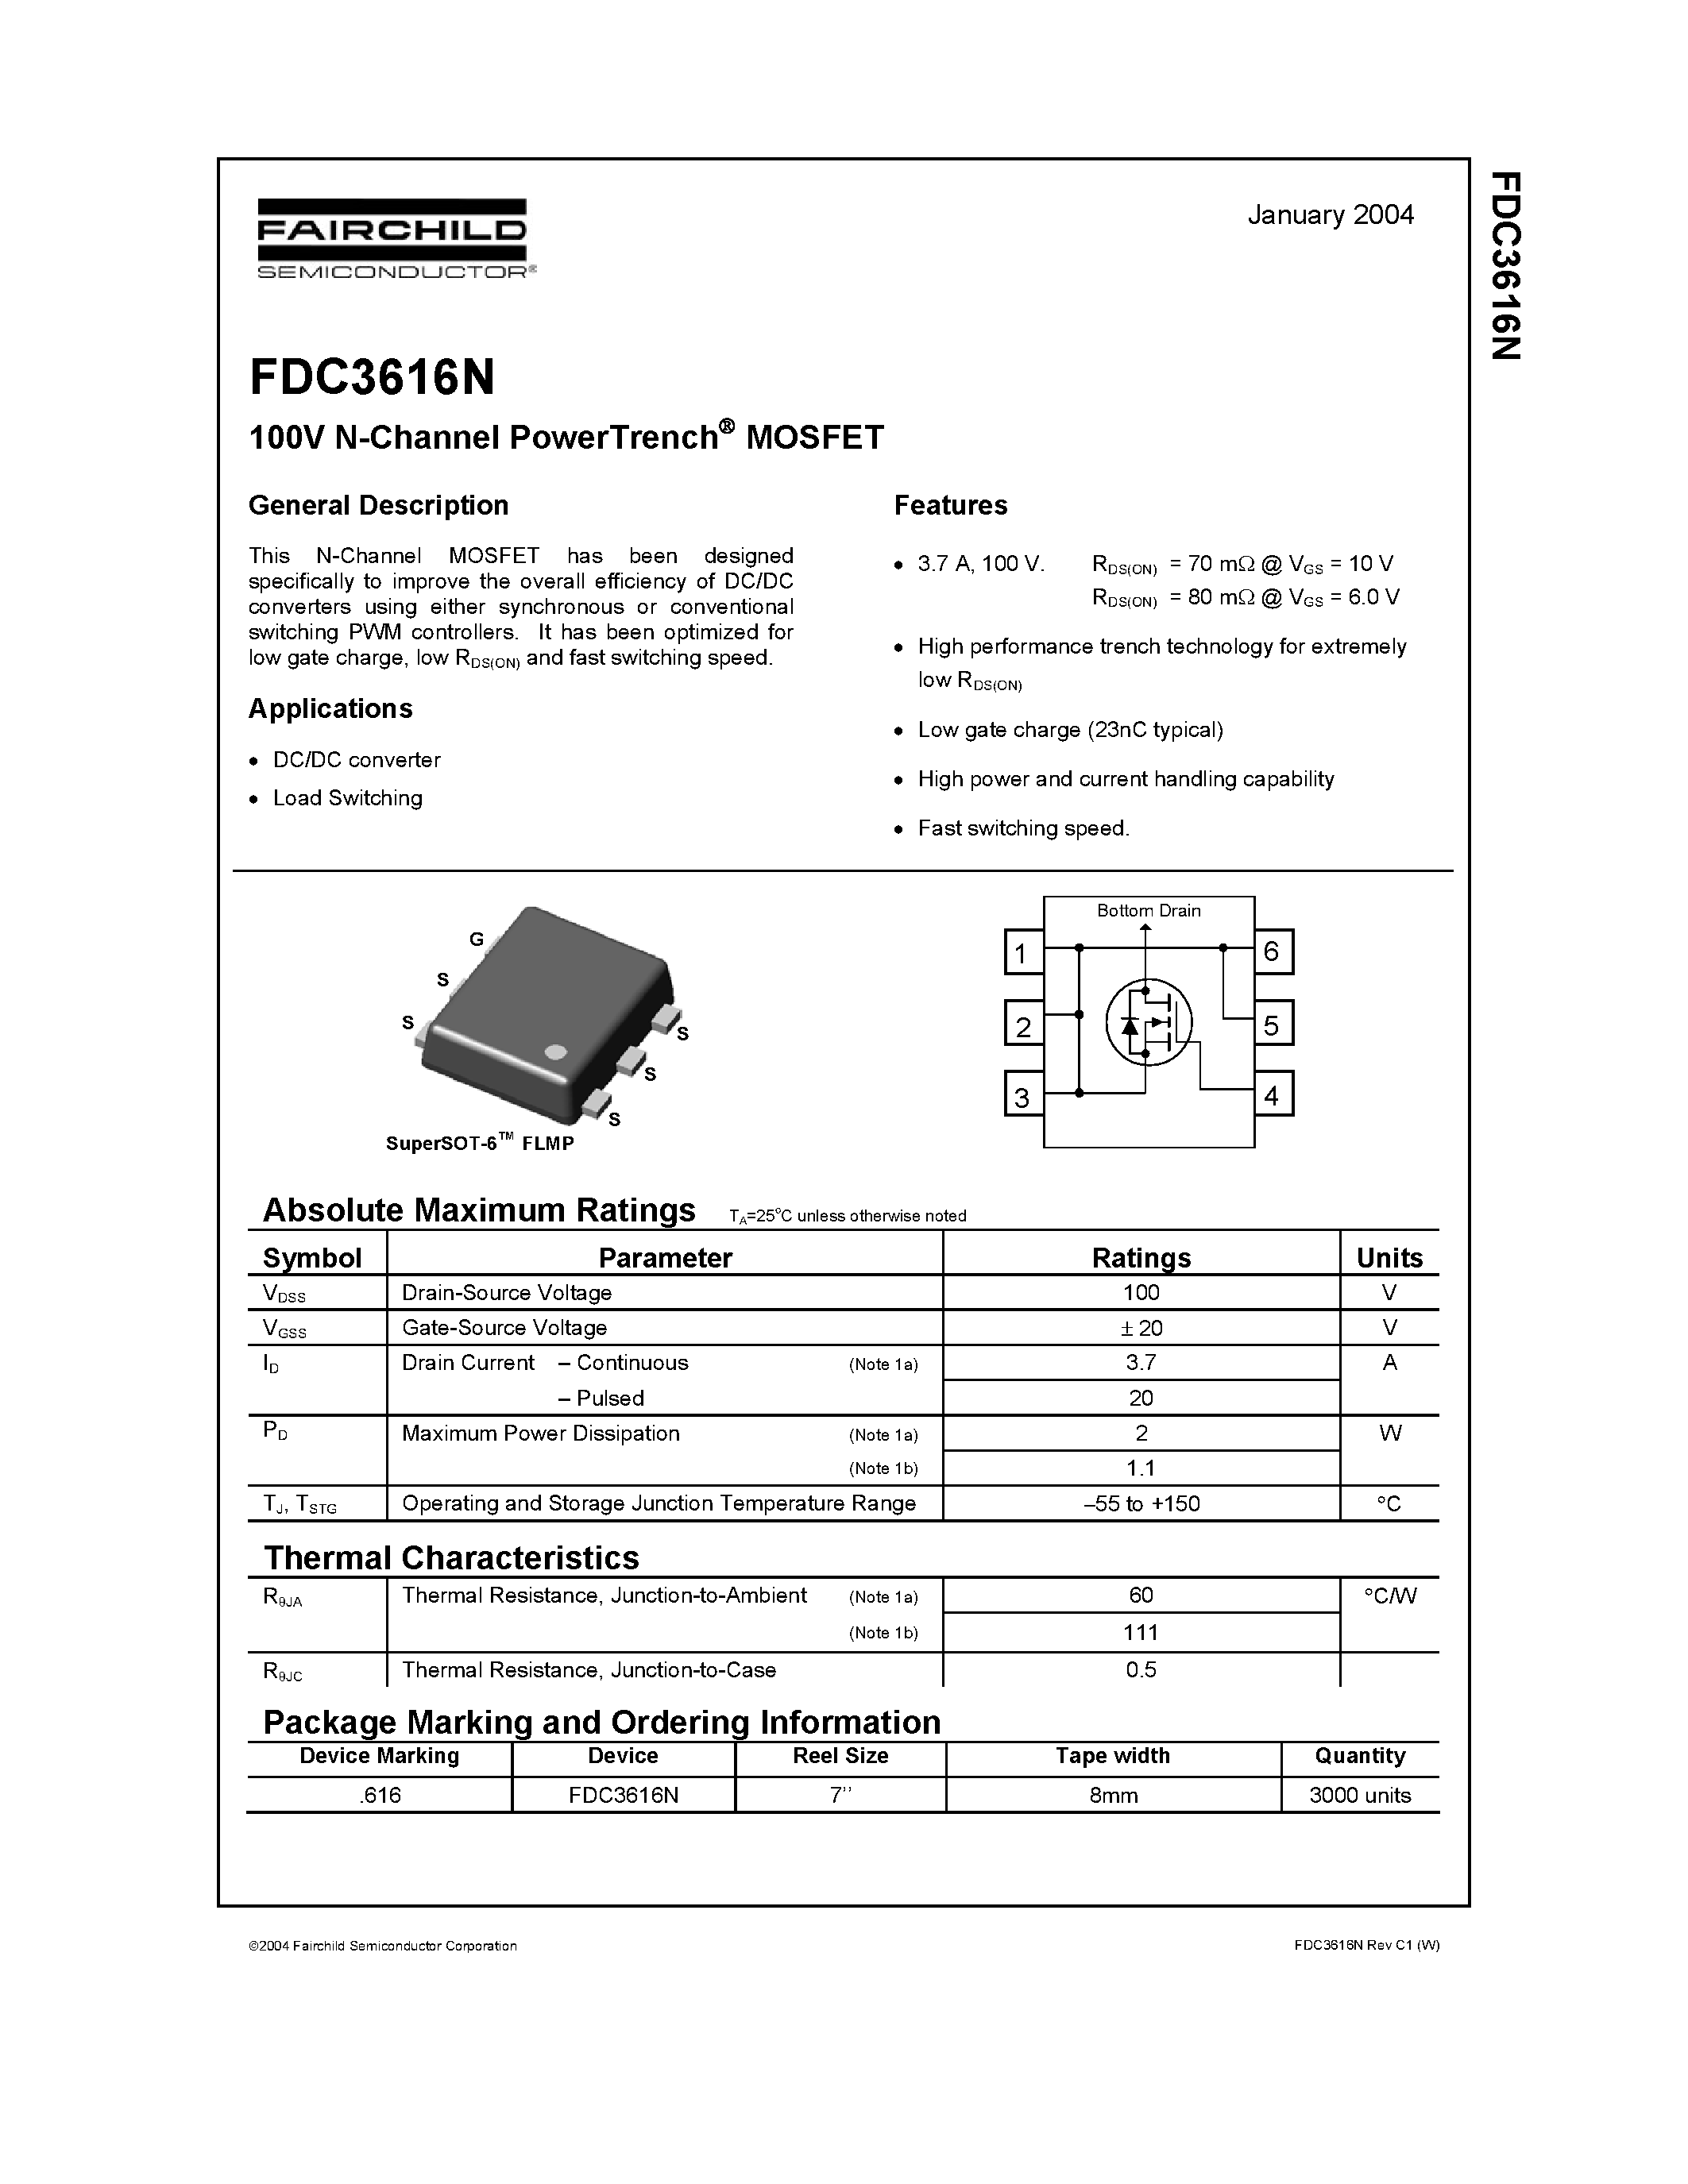 Даташит FDC3616N - 100V N-Channel PowerTrench MOSFET страница 1